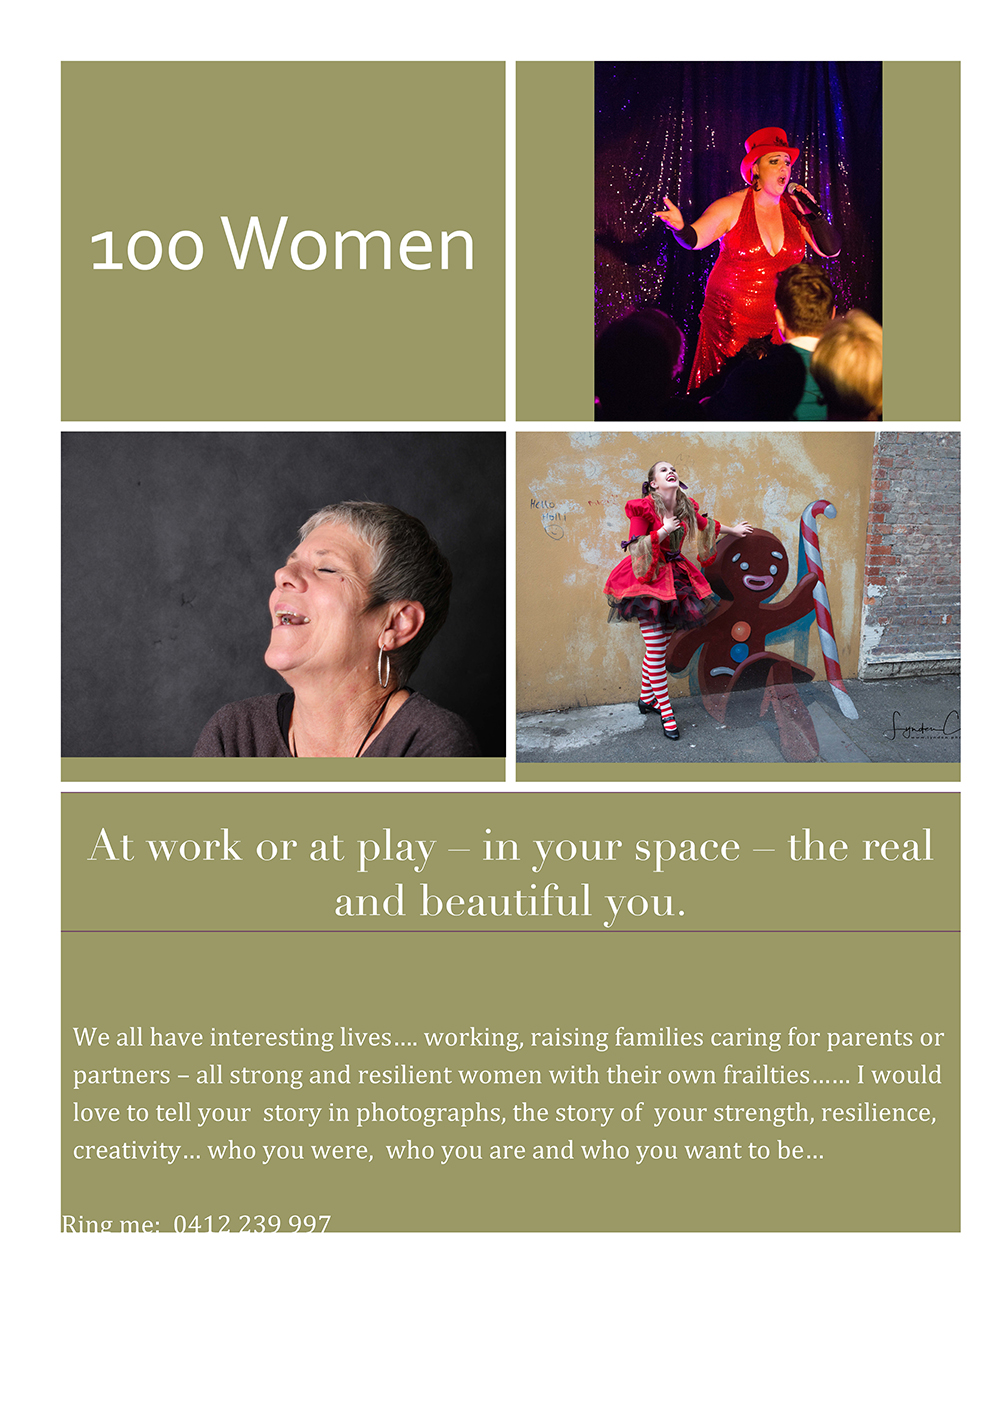 100 women!  An exhibition and a book